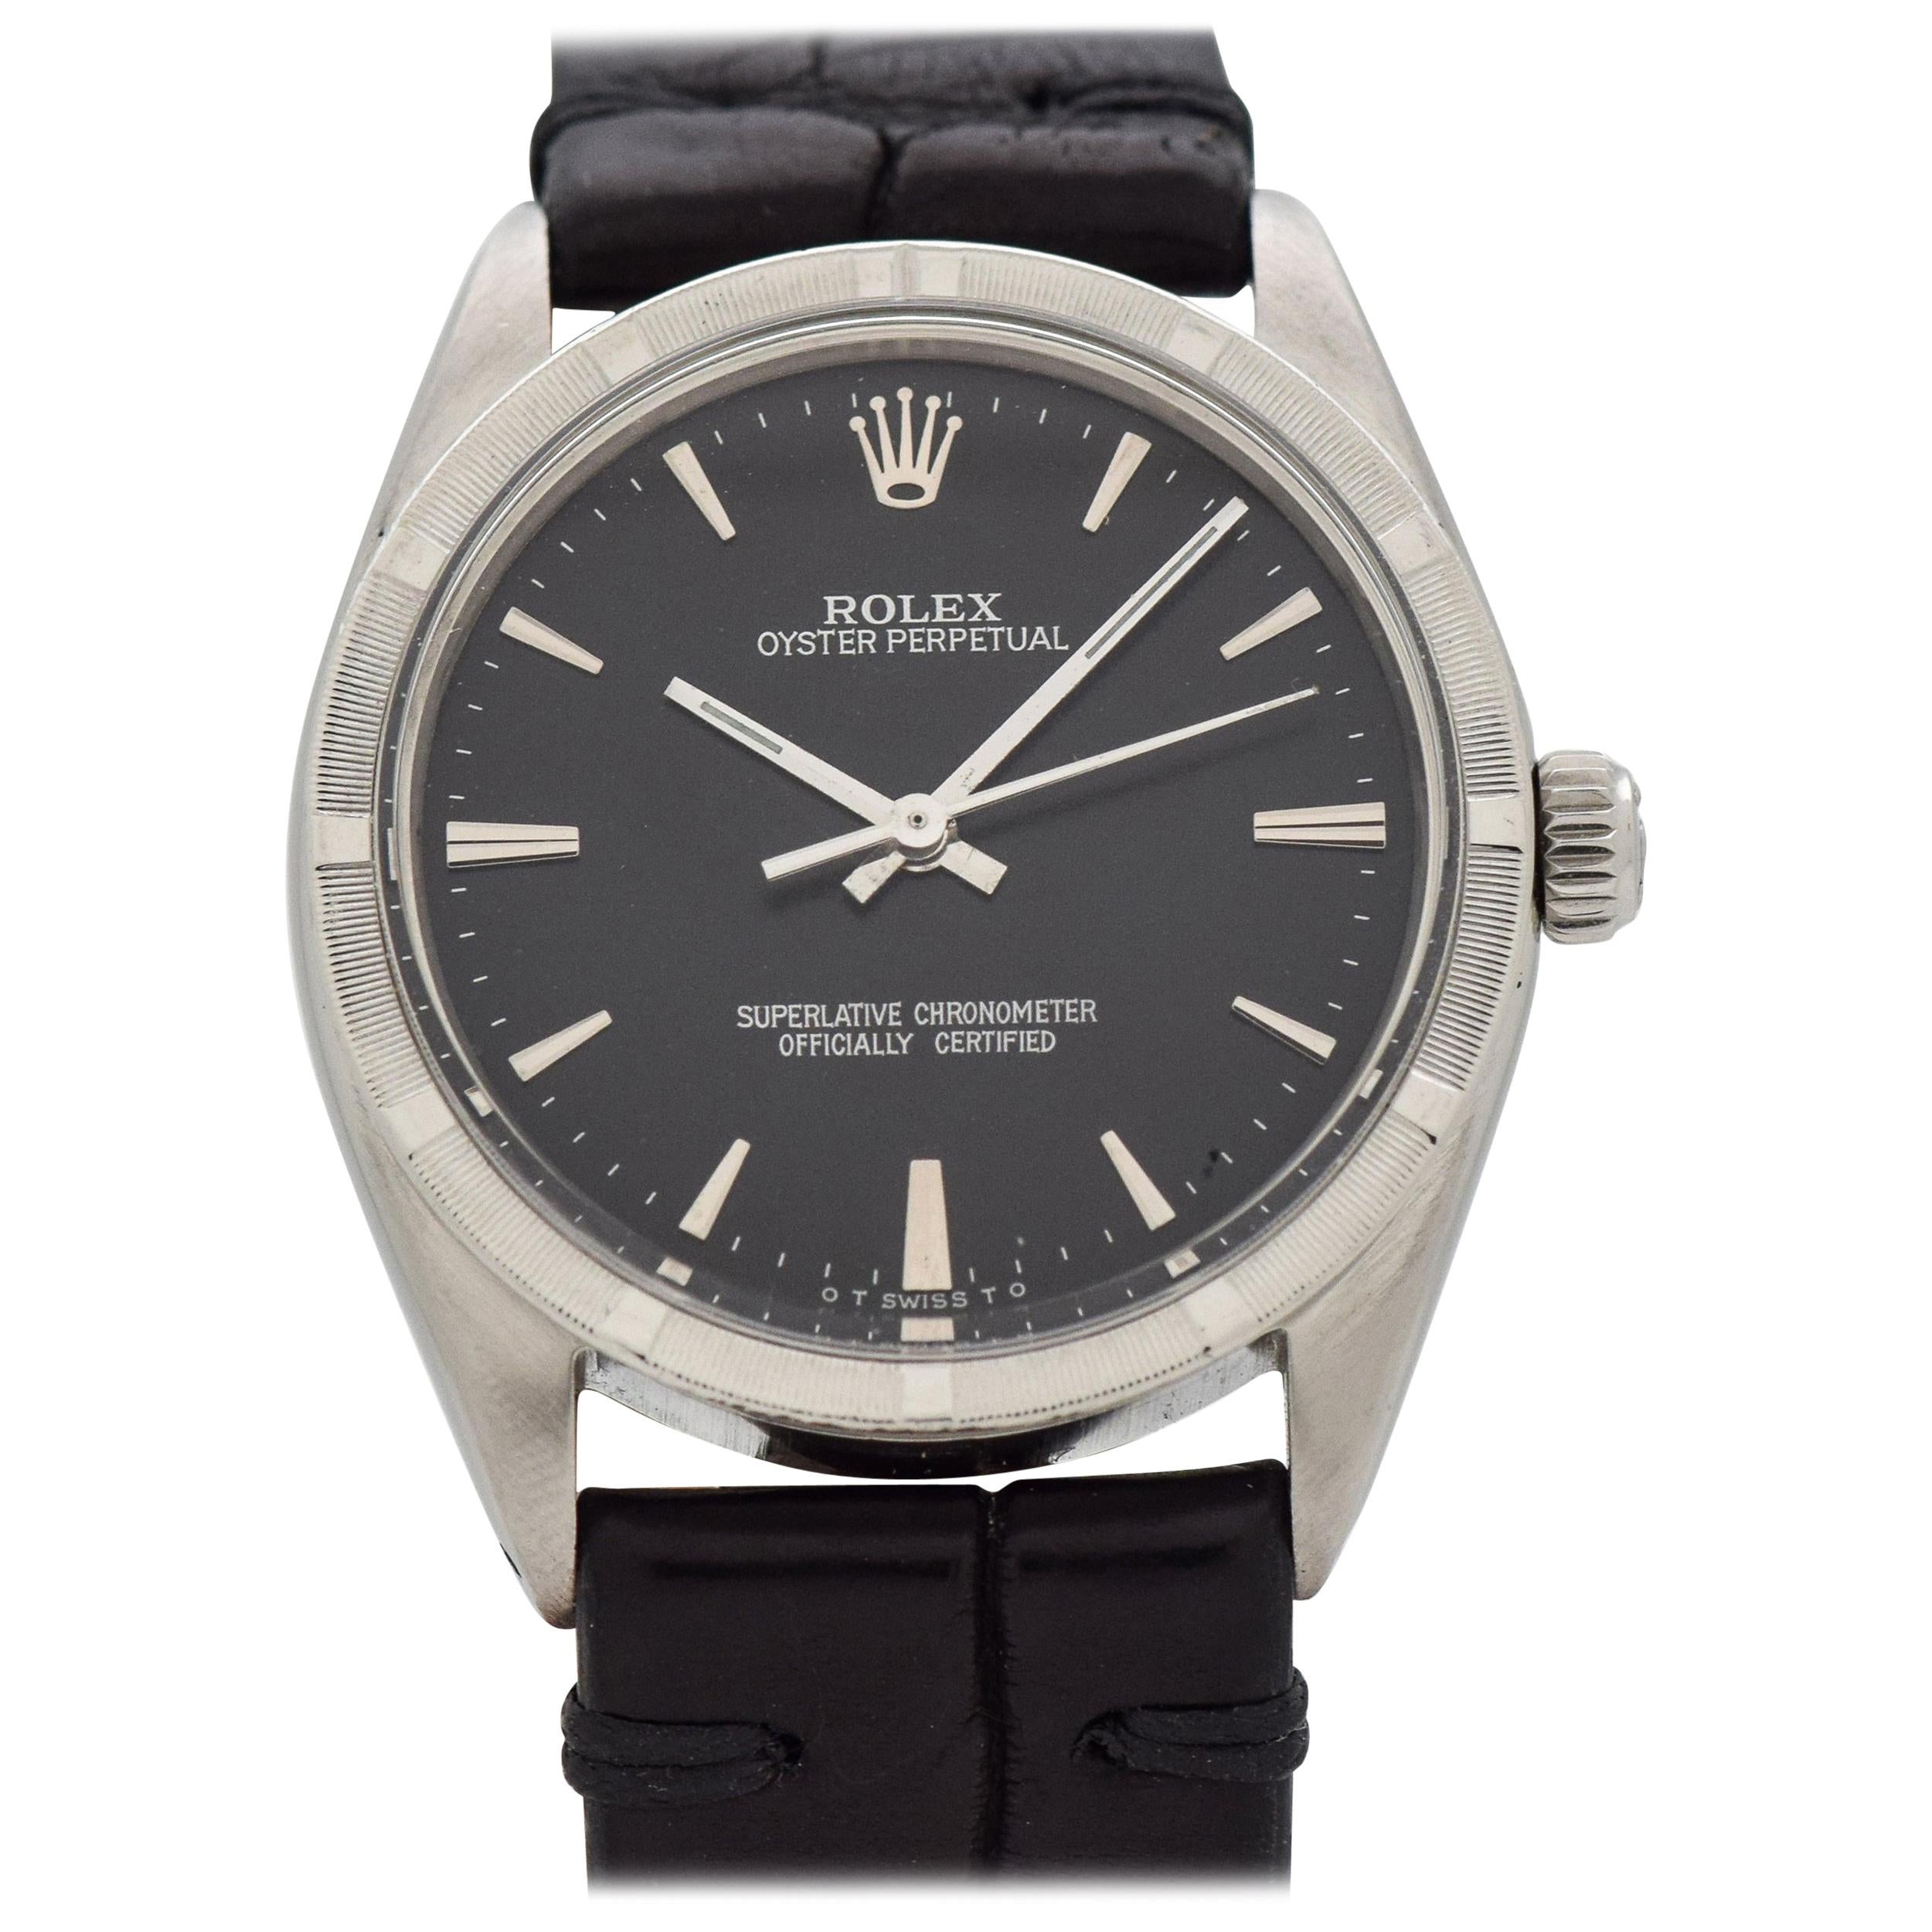 Vintage Rolex Oyster Perpetual Ref. 1007 Stainless Steel Watch, 1966